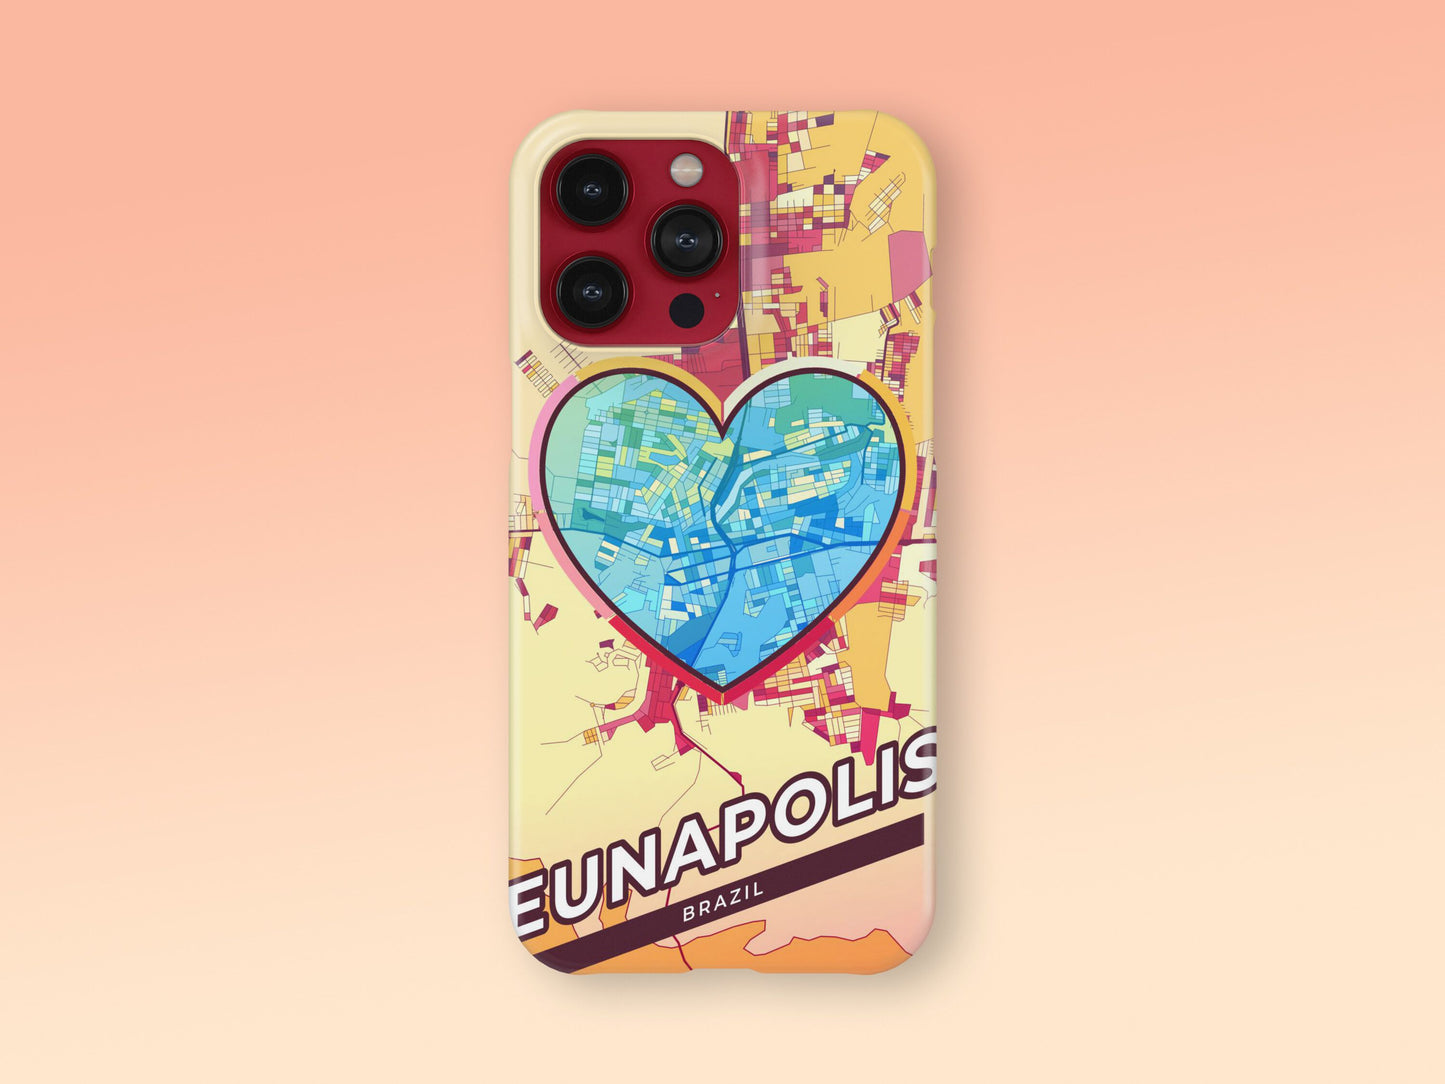 Eunapolis Brazil slim phone case with colorful icon. Birthday, wedding or housewarming gift. Couple match cases. 2